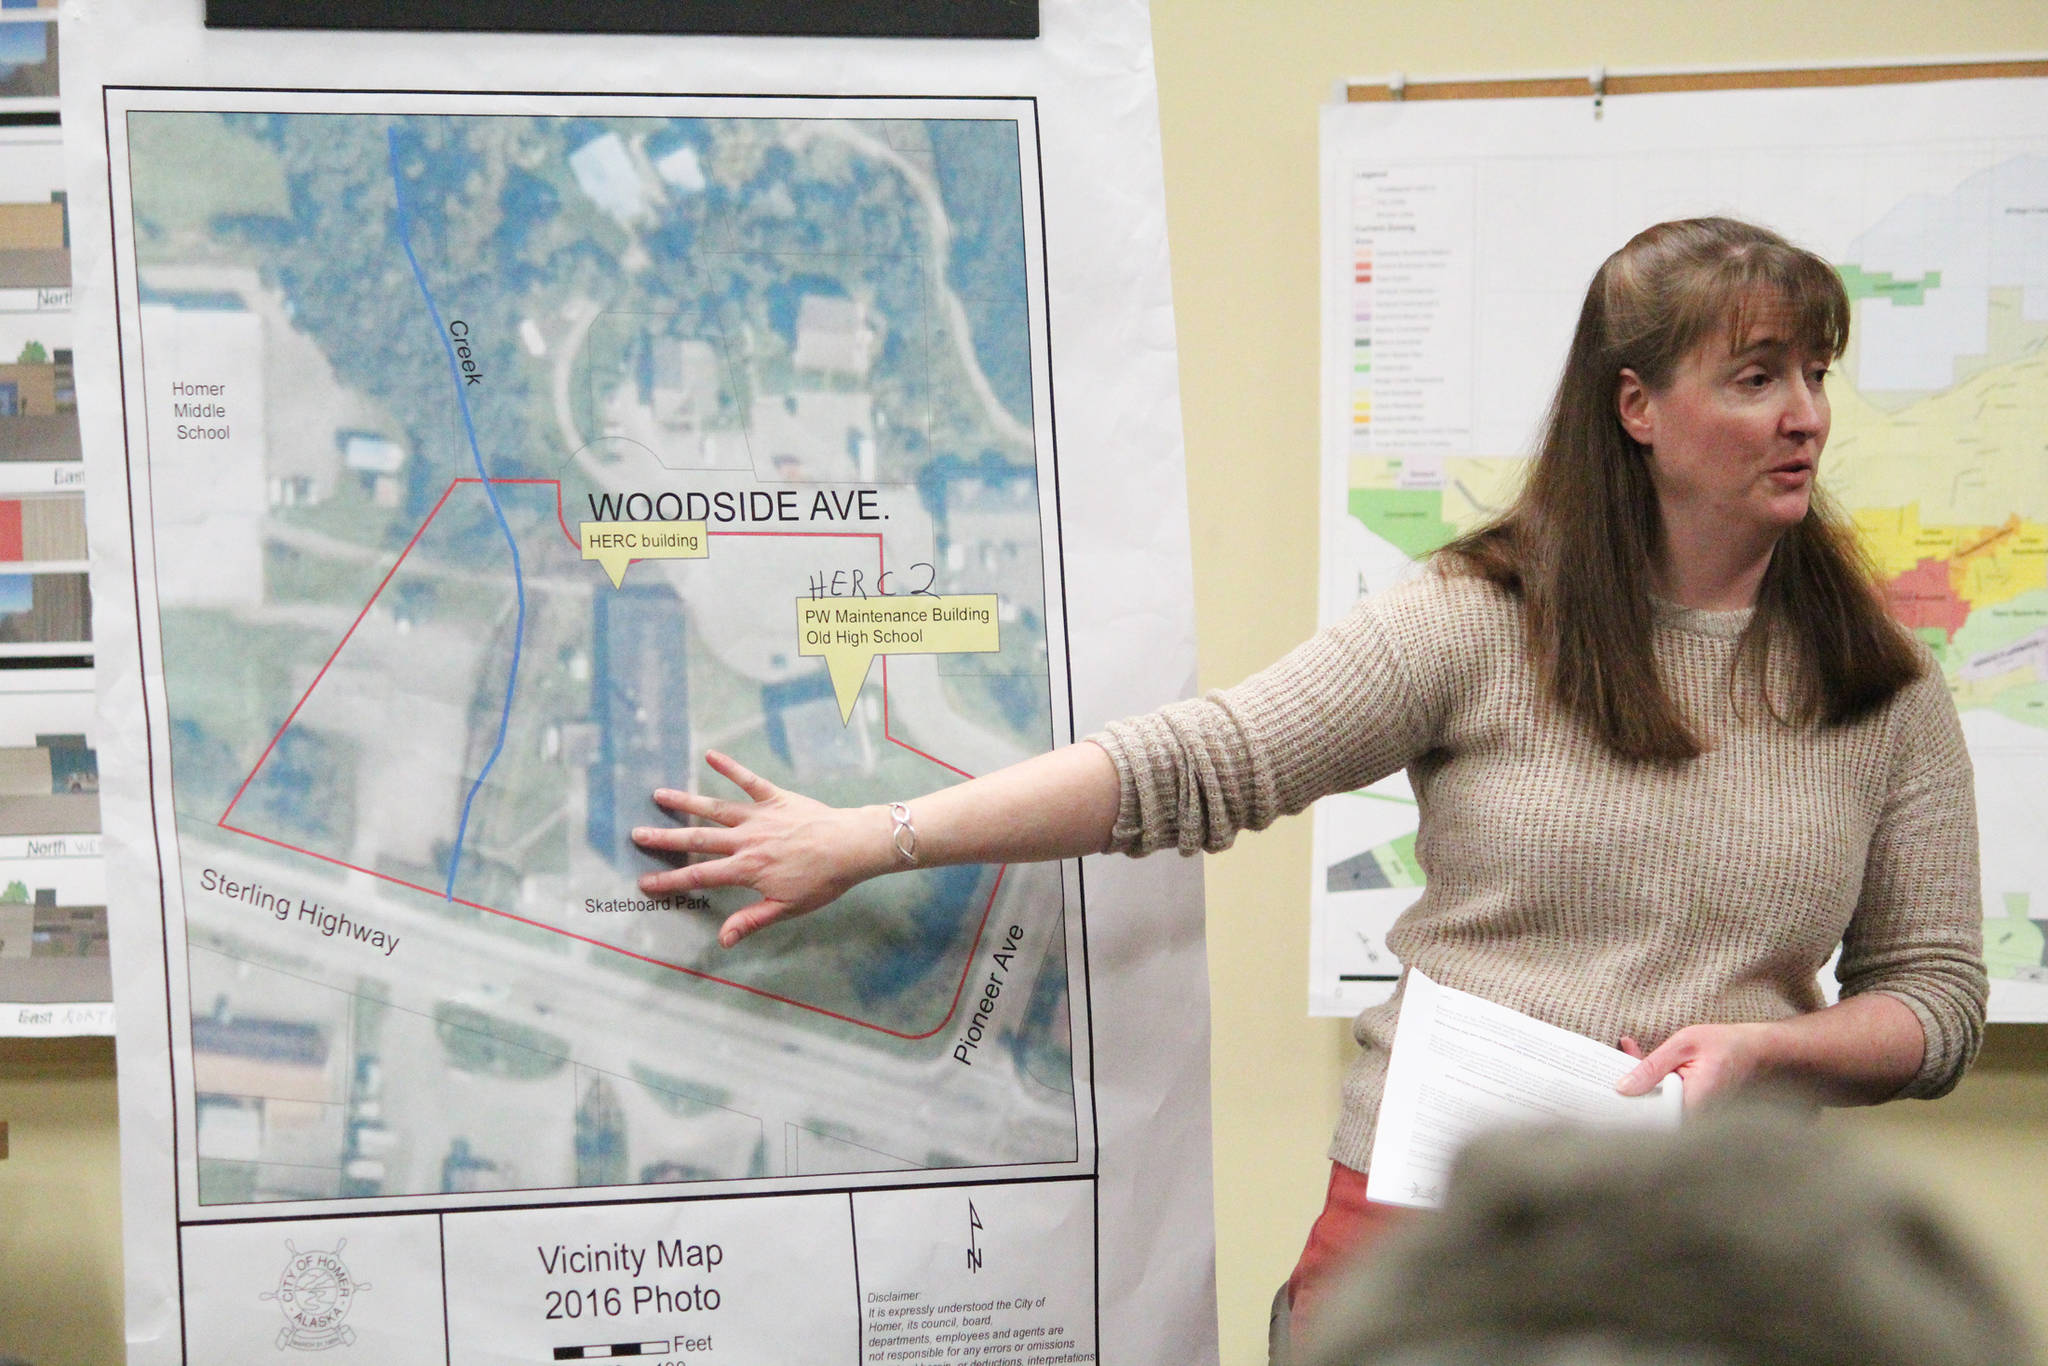 Deputy City Planner Julie Engebretsen explains elements of the Homer Education and Recreation Complex and plans for dealing with the devolving buildings during a Tuesday, Jan. 22, 2019 community meeting at City Hall in Homer, Alaska. (Photo by Megan Pacer/Homer News)